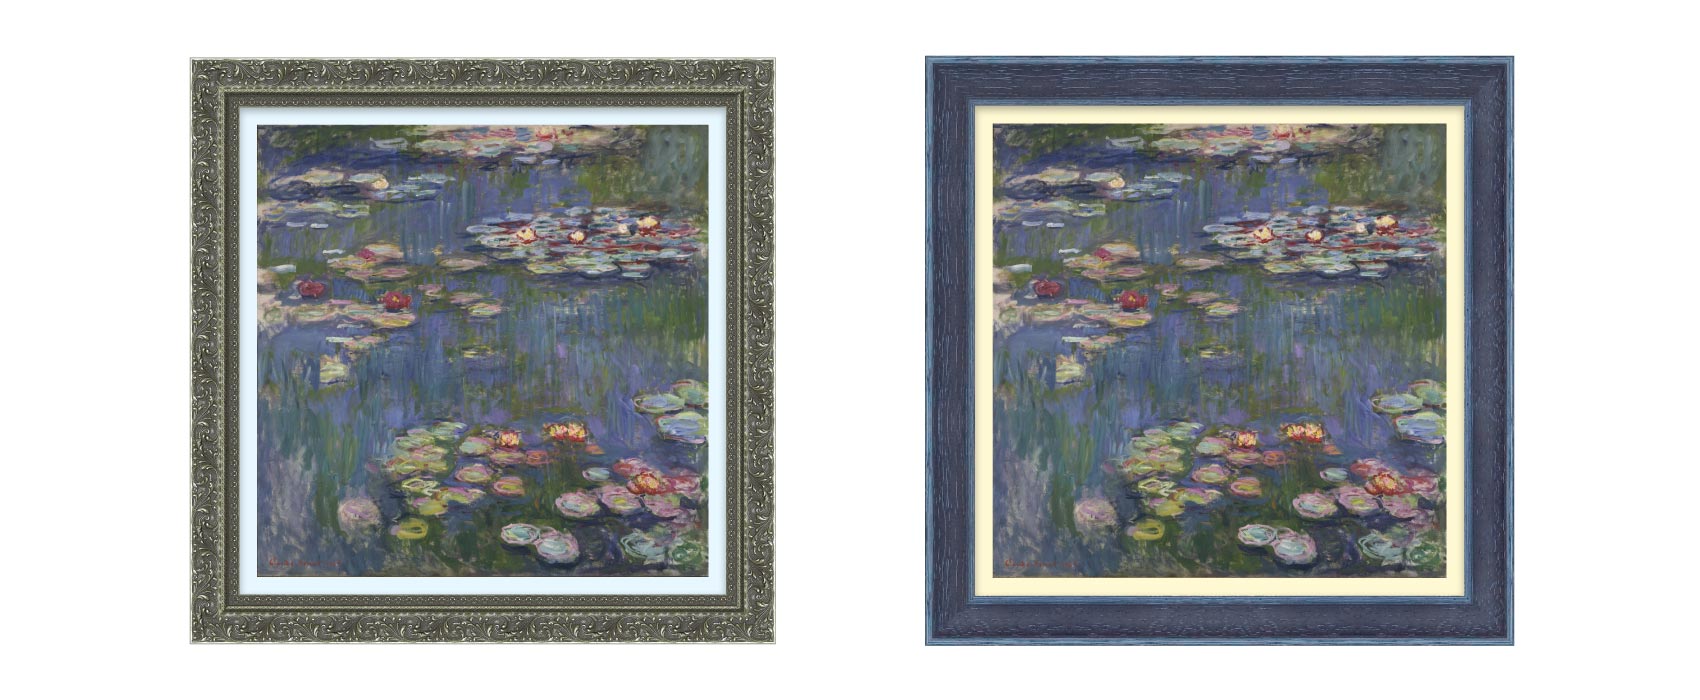 Claud Monet, Water Lilies, 1918 framed example